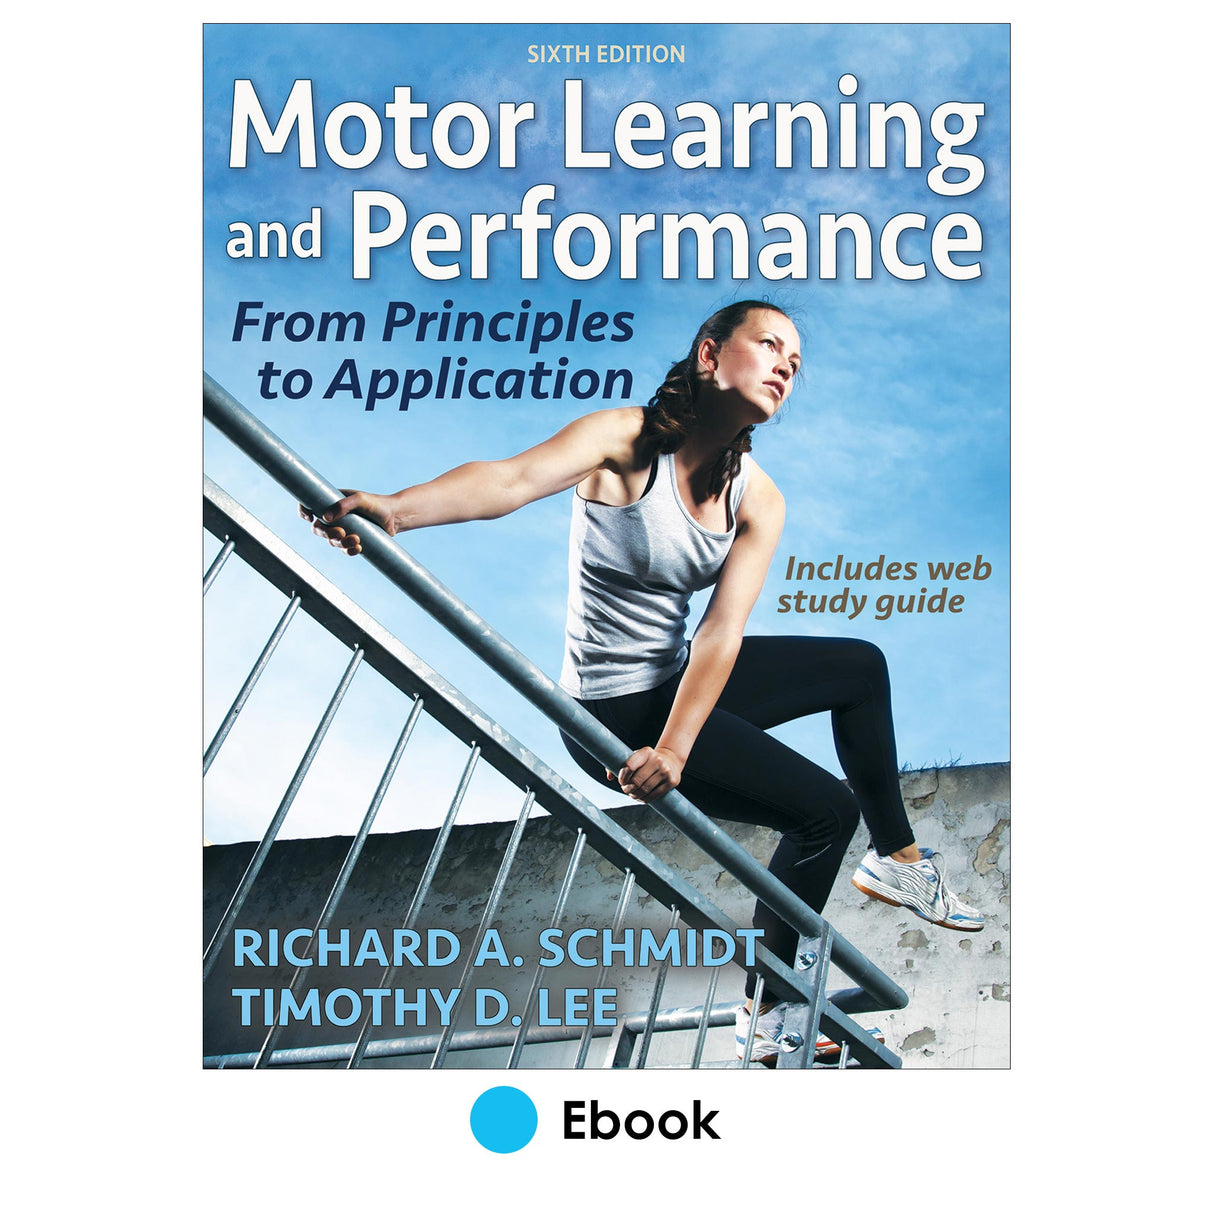 Motor Learning and Performance 6th Edition epub With Web Study Guide